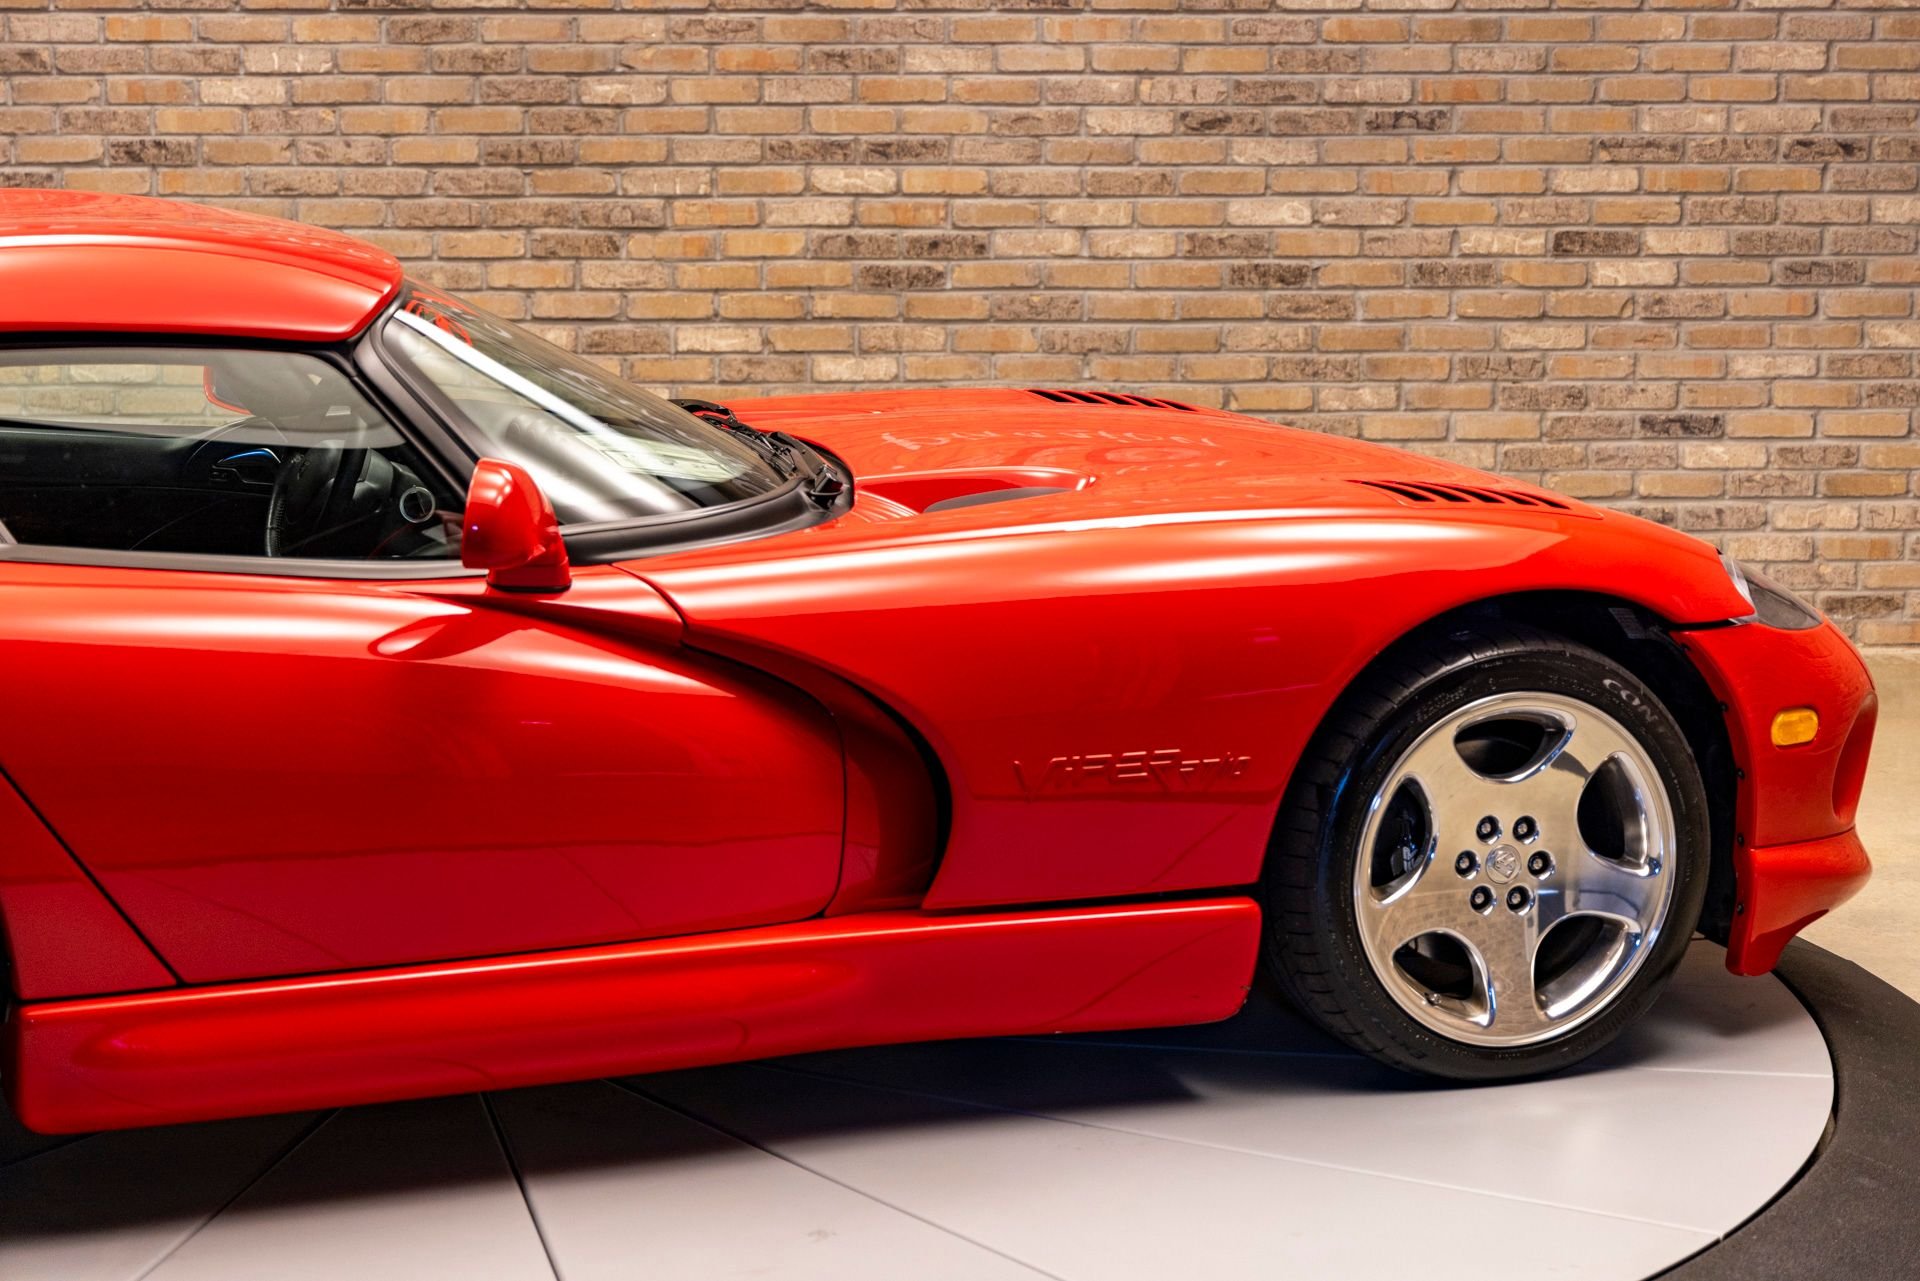 813162 | 2001 Dodge Viper RT/10 Convertible | Throttlestop | Automotive and Motorcycle Consignment Dealer